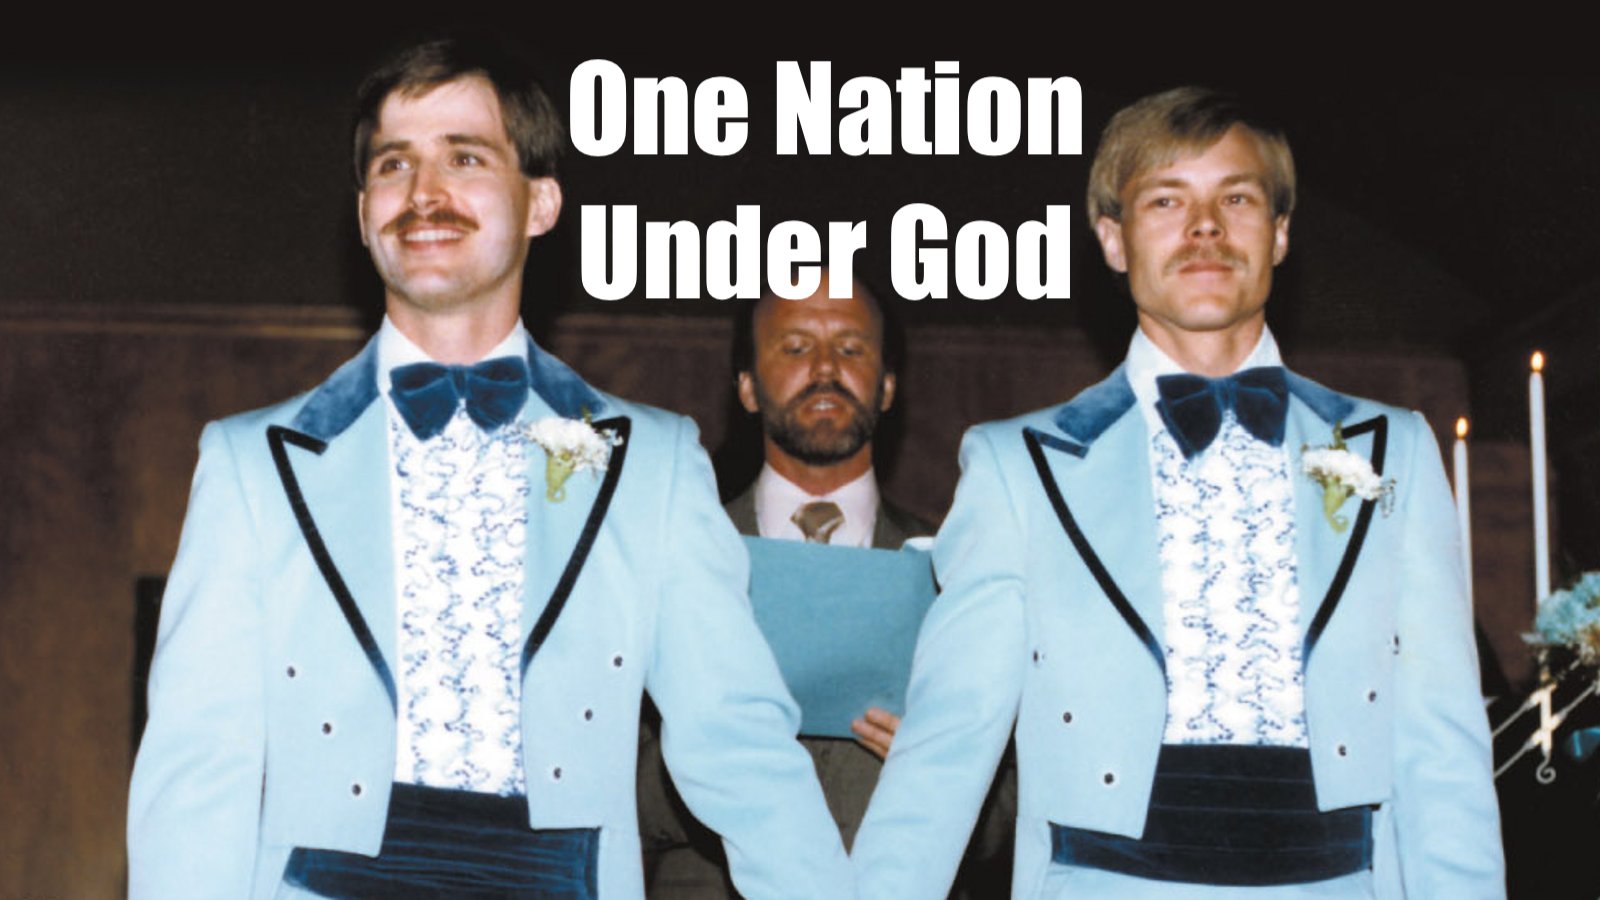 One Nation Under God - Investigating Historical Efforts to Help "Cure" Homosexuality